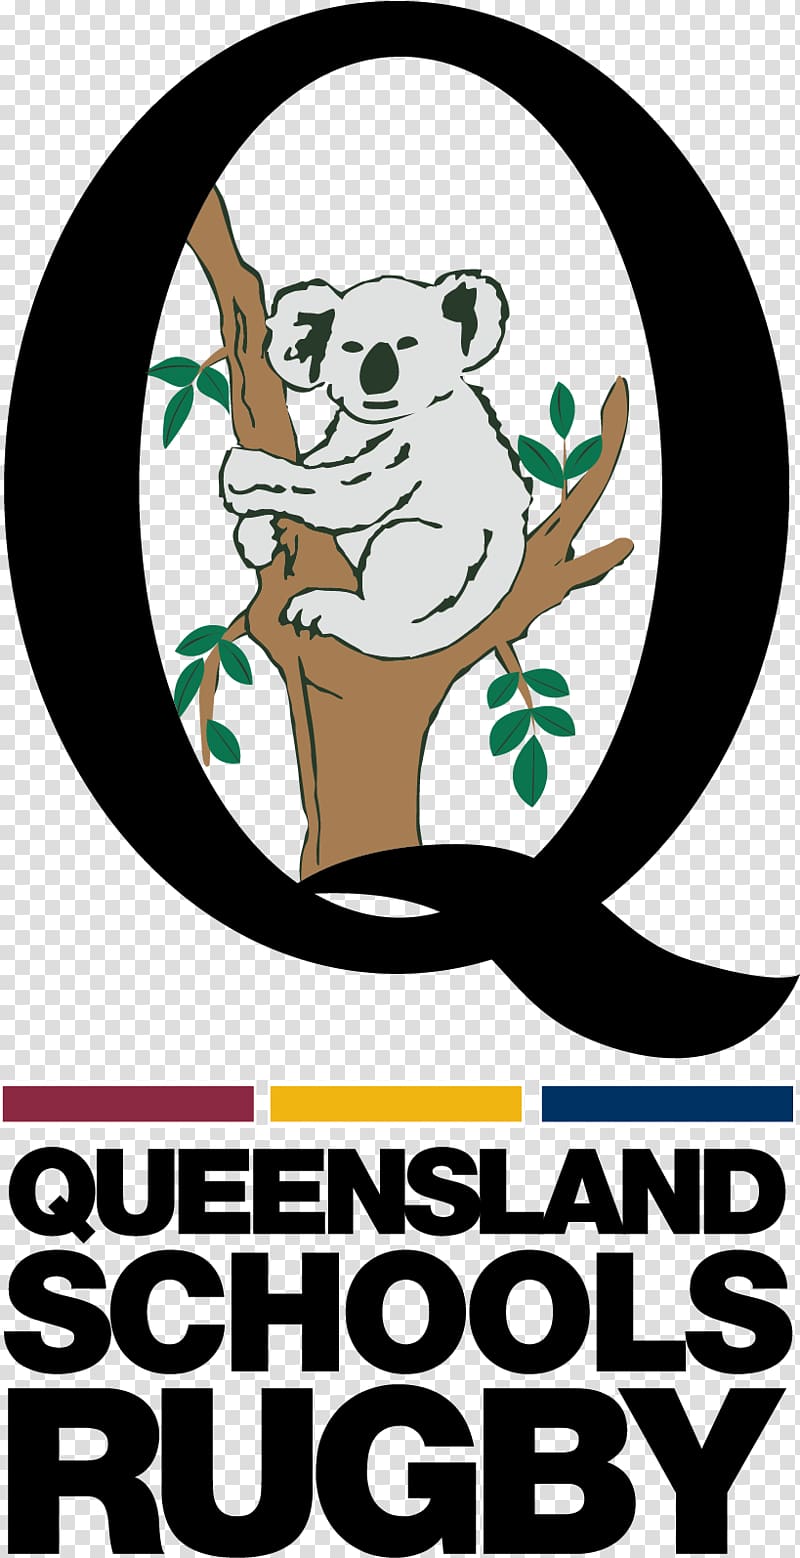 Queensland Reds Brothers Old Boys Super Rugby Souths Rugby Brisbane Global Rugby Tens, Rugby transparent background PNG clipart